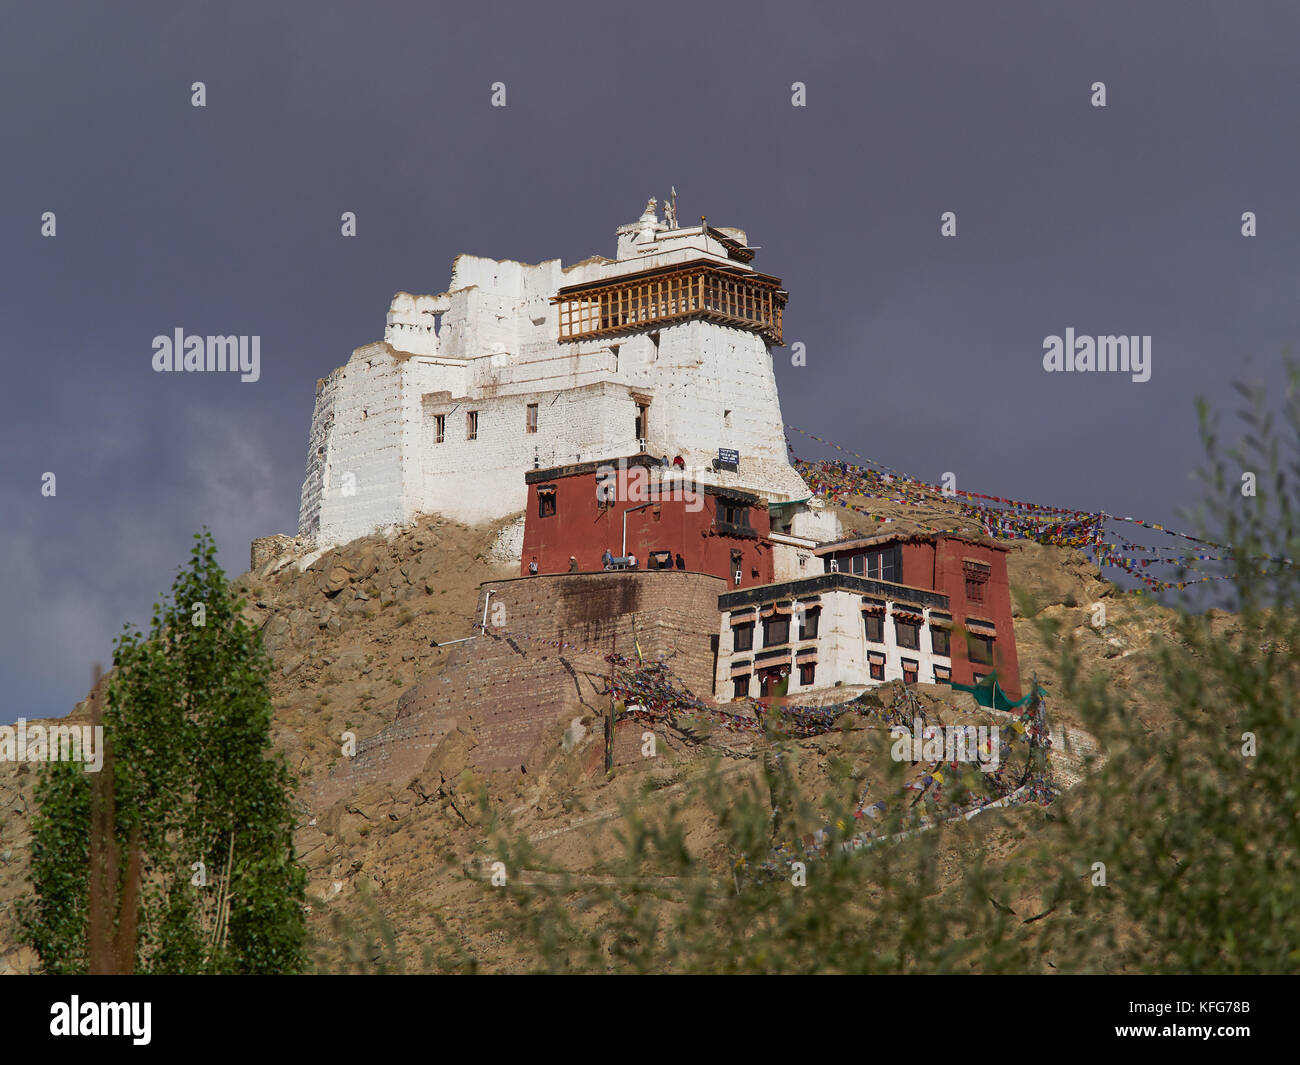 Buddhist monastery Namgyal Tseemo close up: white and burgundy gong buildings stand on top of a cliff among the trees, Ladakh, Northern India. Stock Photo